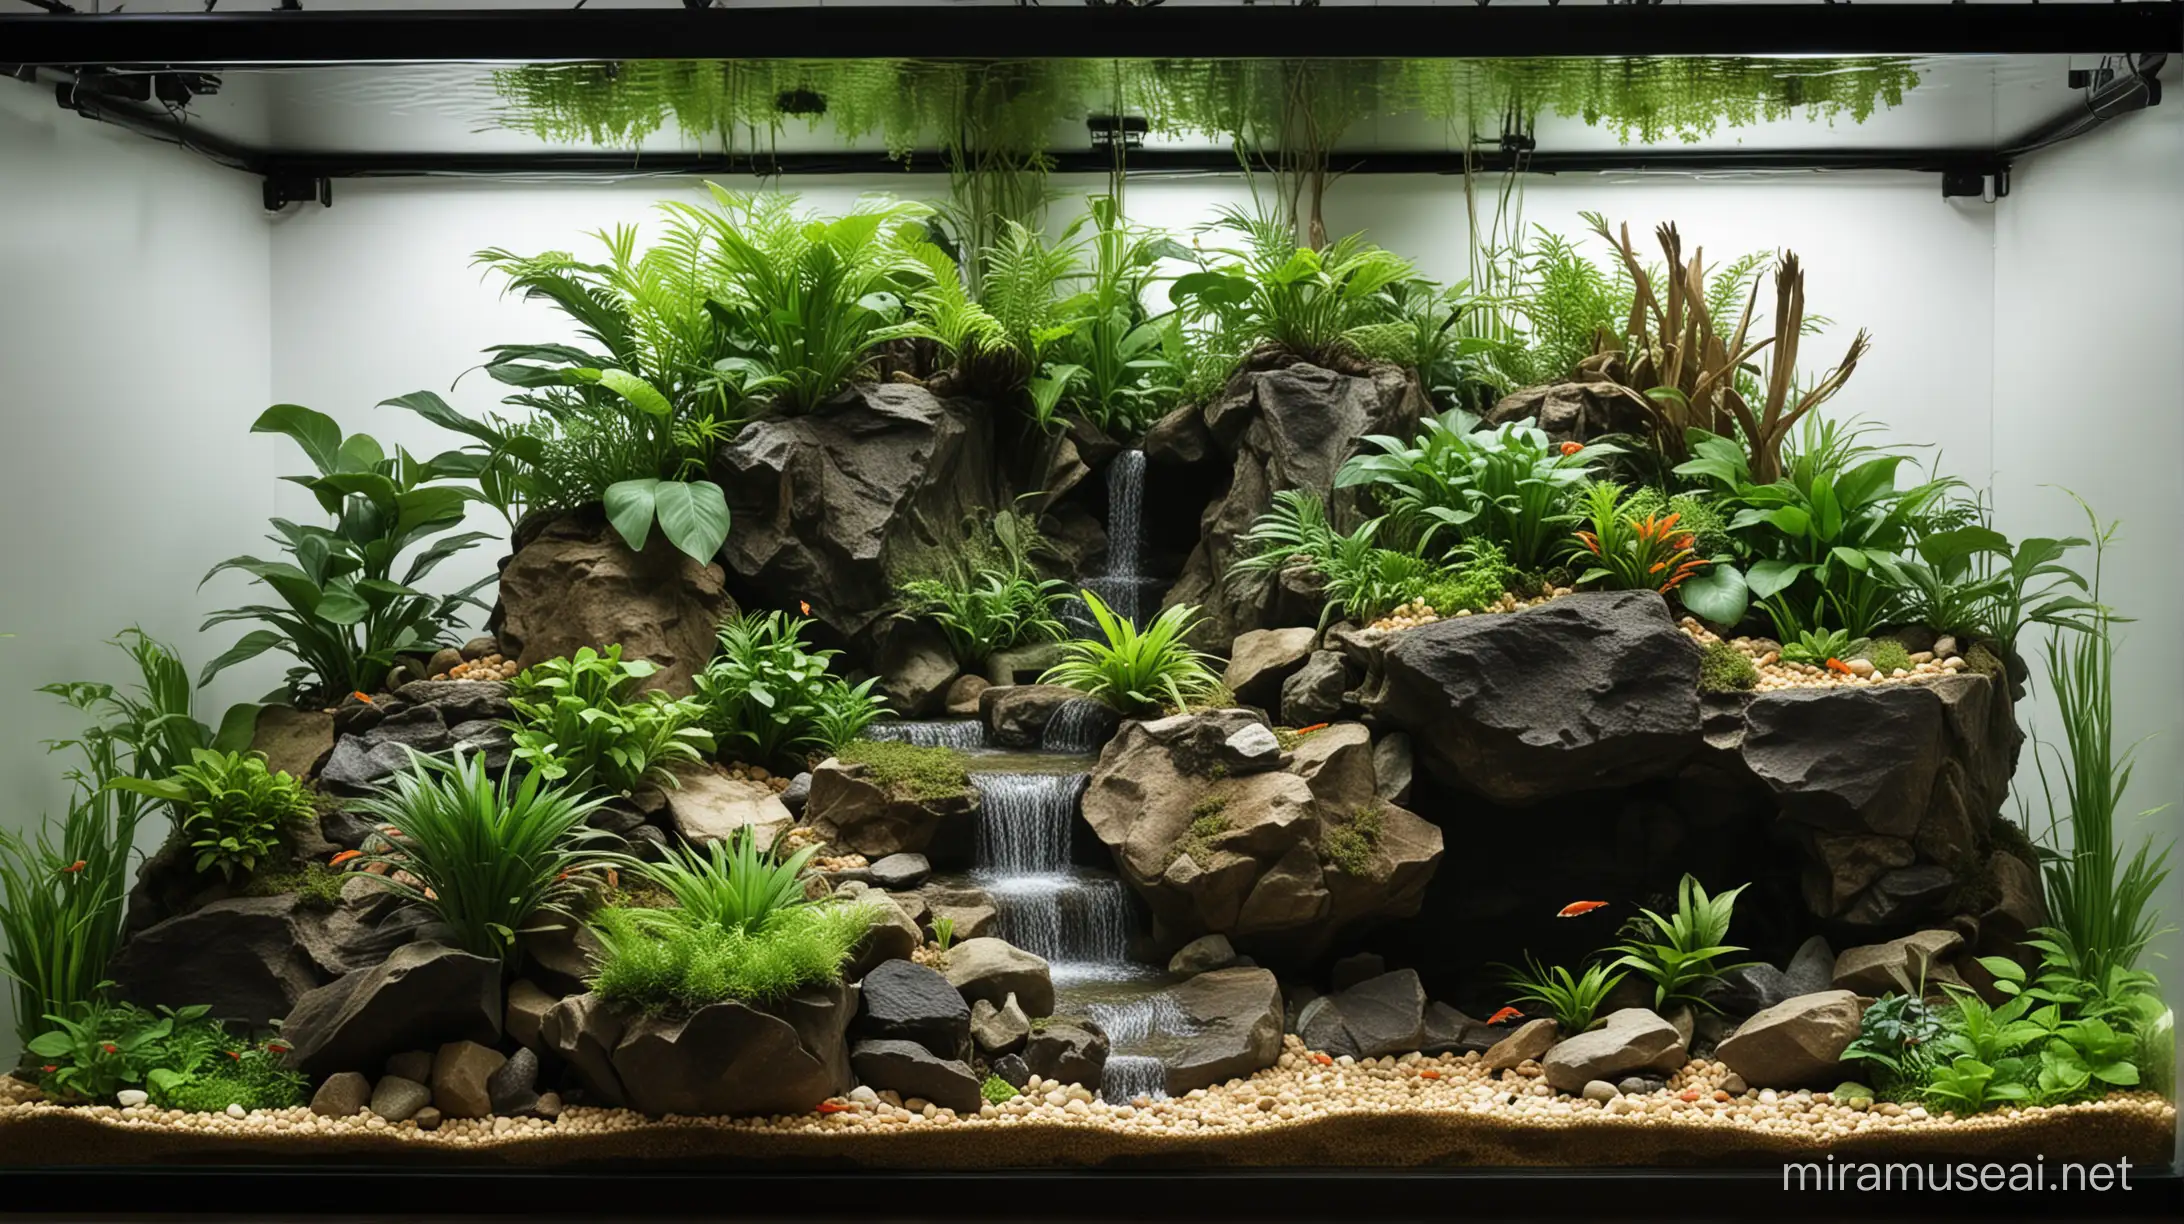 A snake tropical paludarium in a 130cm x 45cm x 45 cm terrarium with an lake-like zone for fishes and with a cliff waterfall cascade.